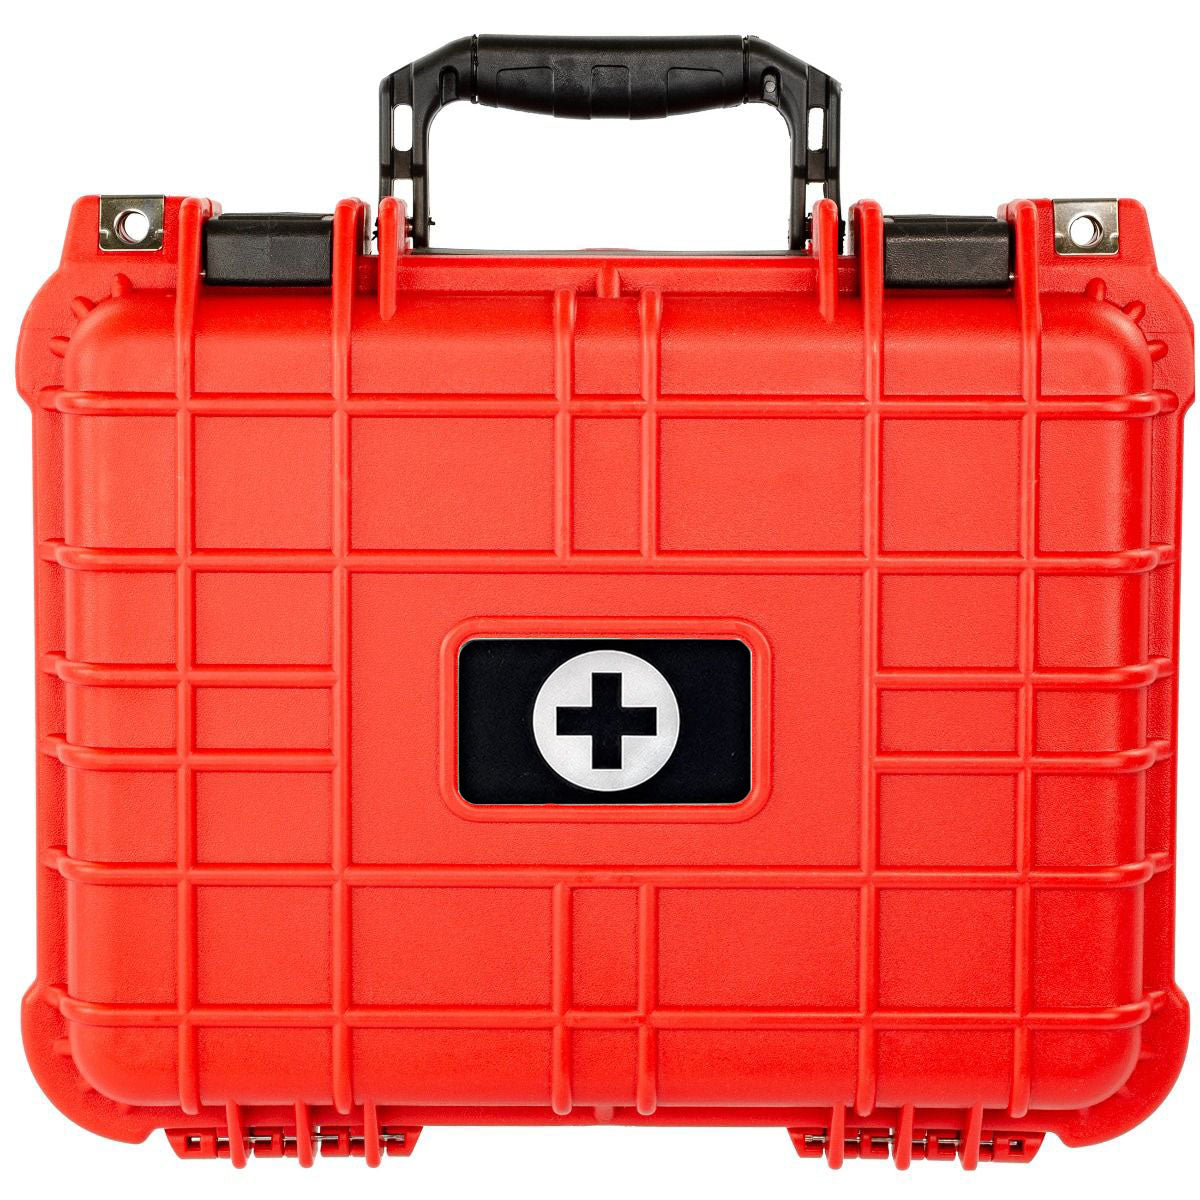 HARD MEDICAL CASE - Small